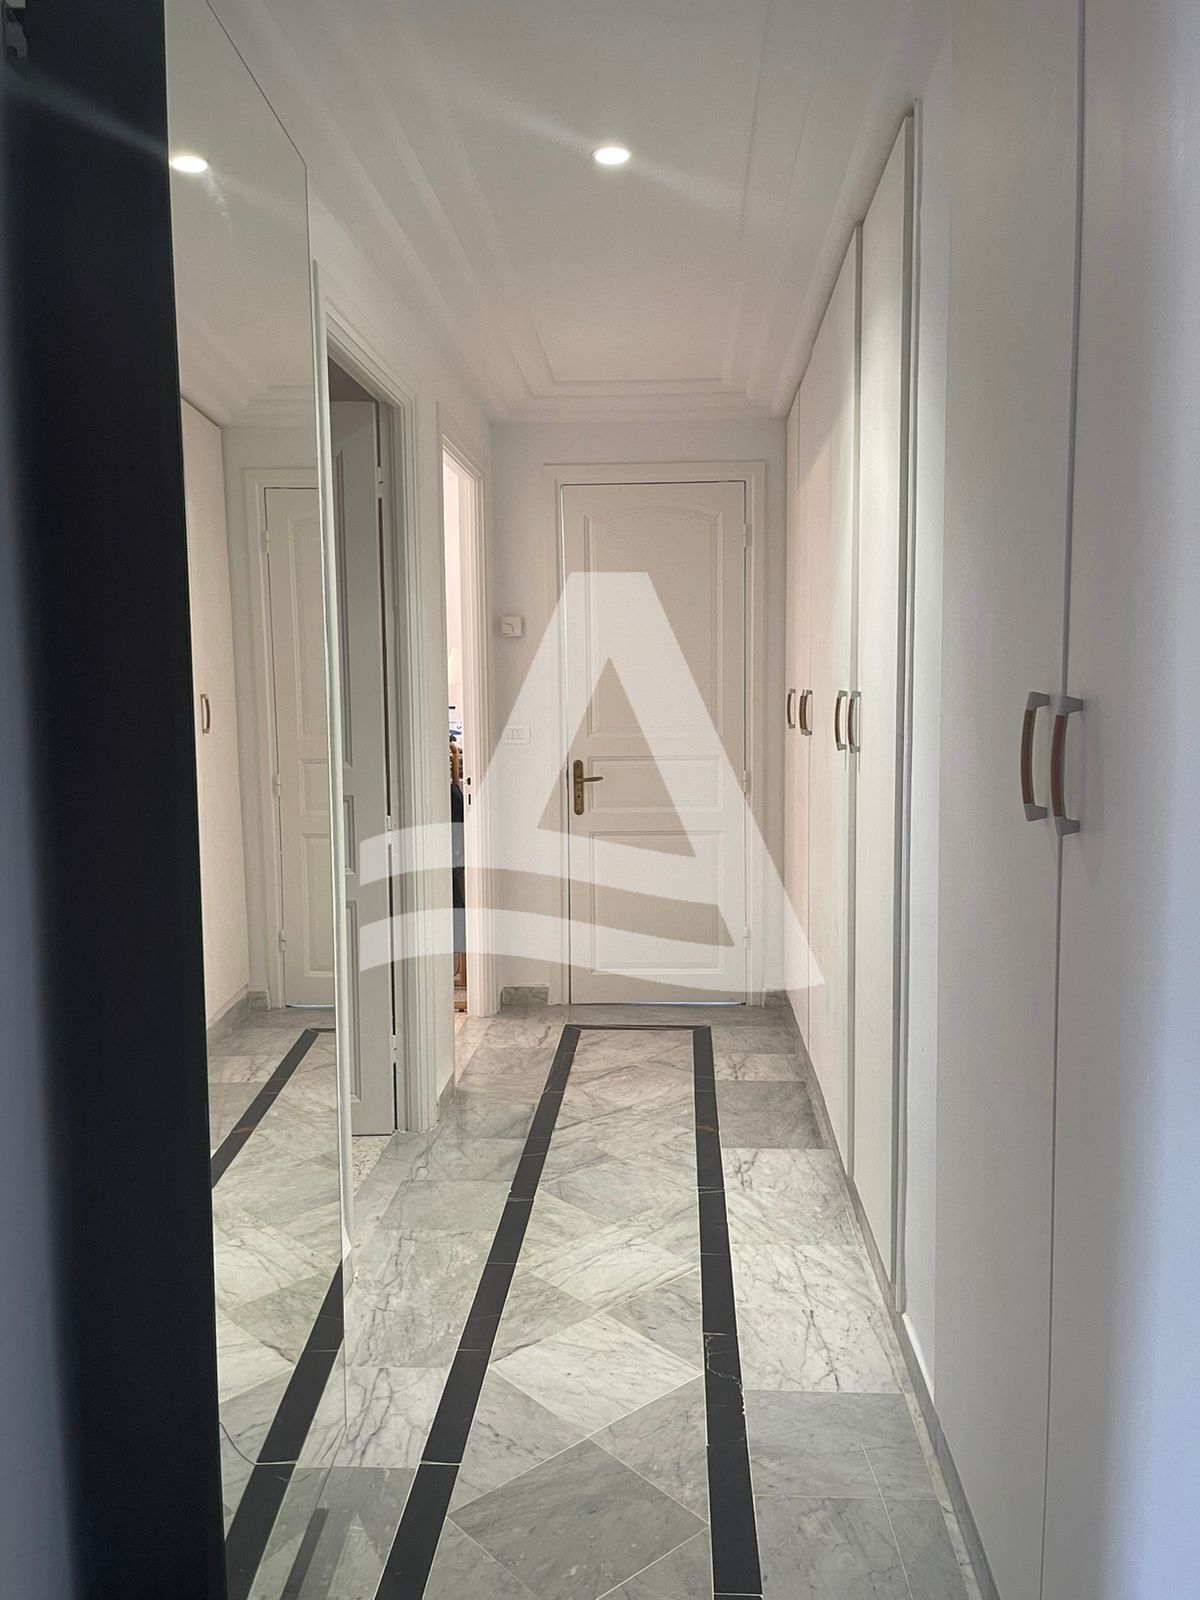 A vendre appartement a Ain zaghouen nord image 3